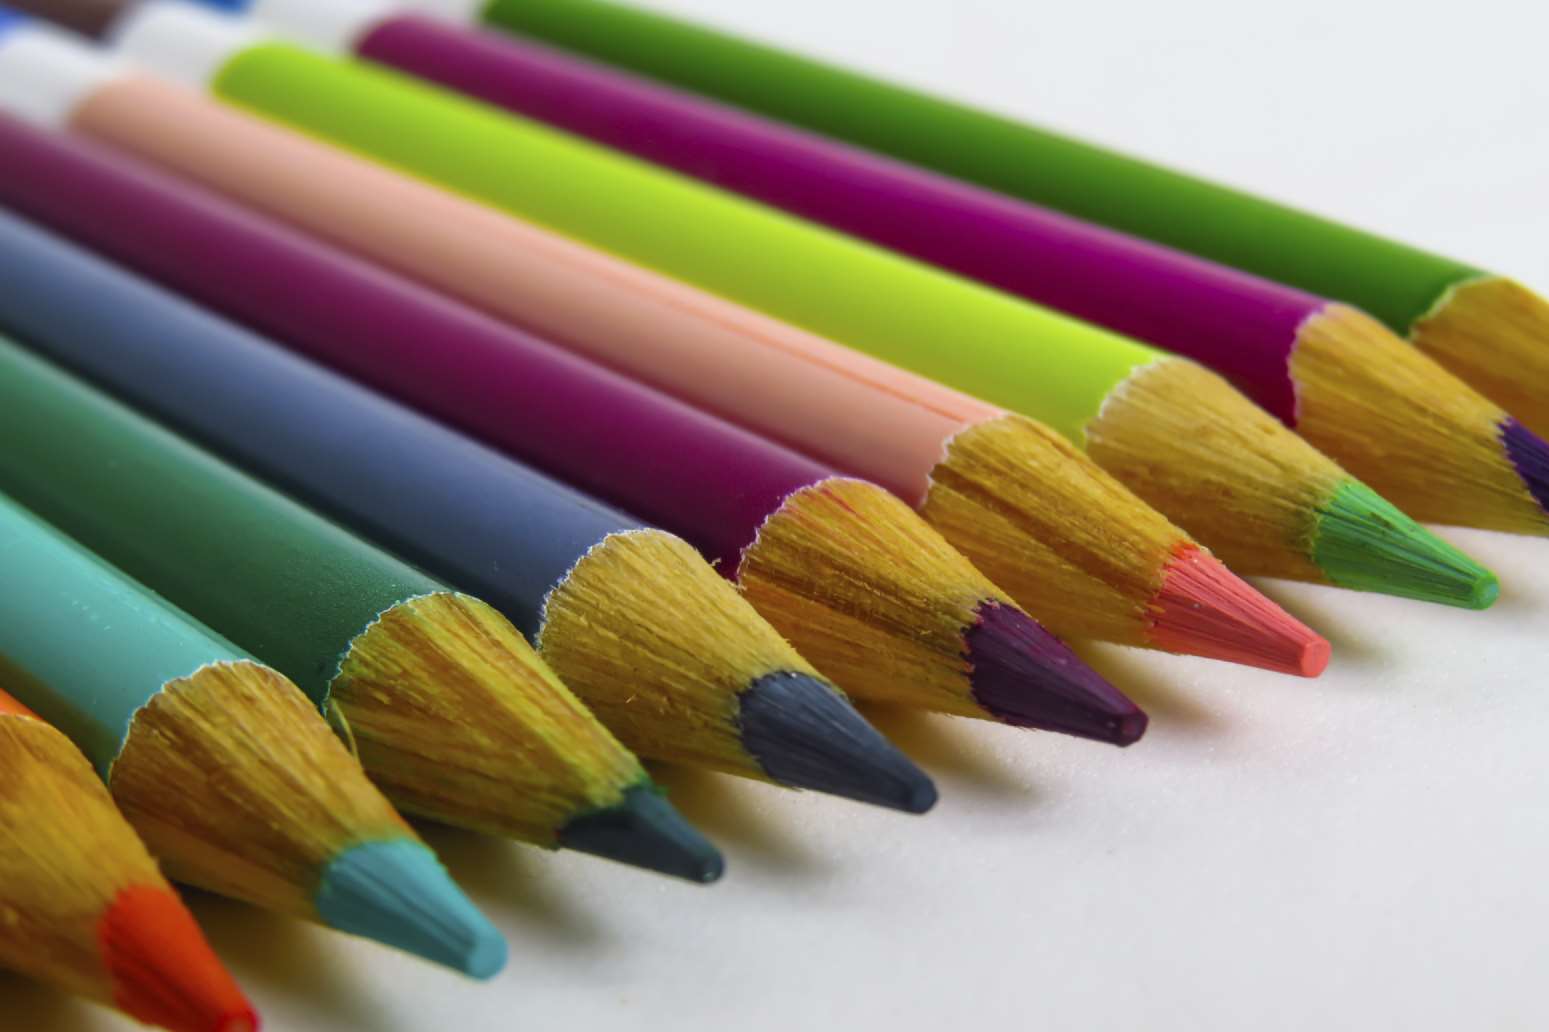 Pens and pencils are a tiny fraction of what parents must buy for starting secondary school